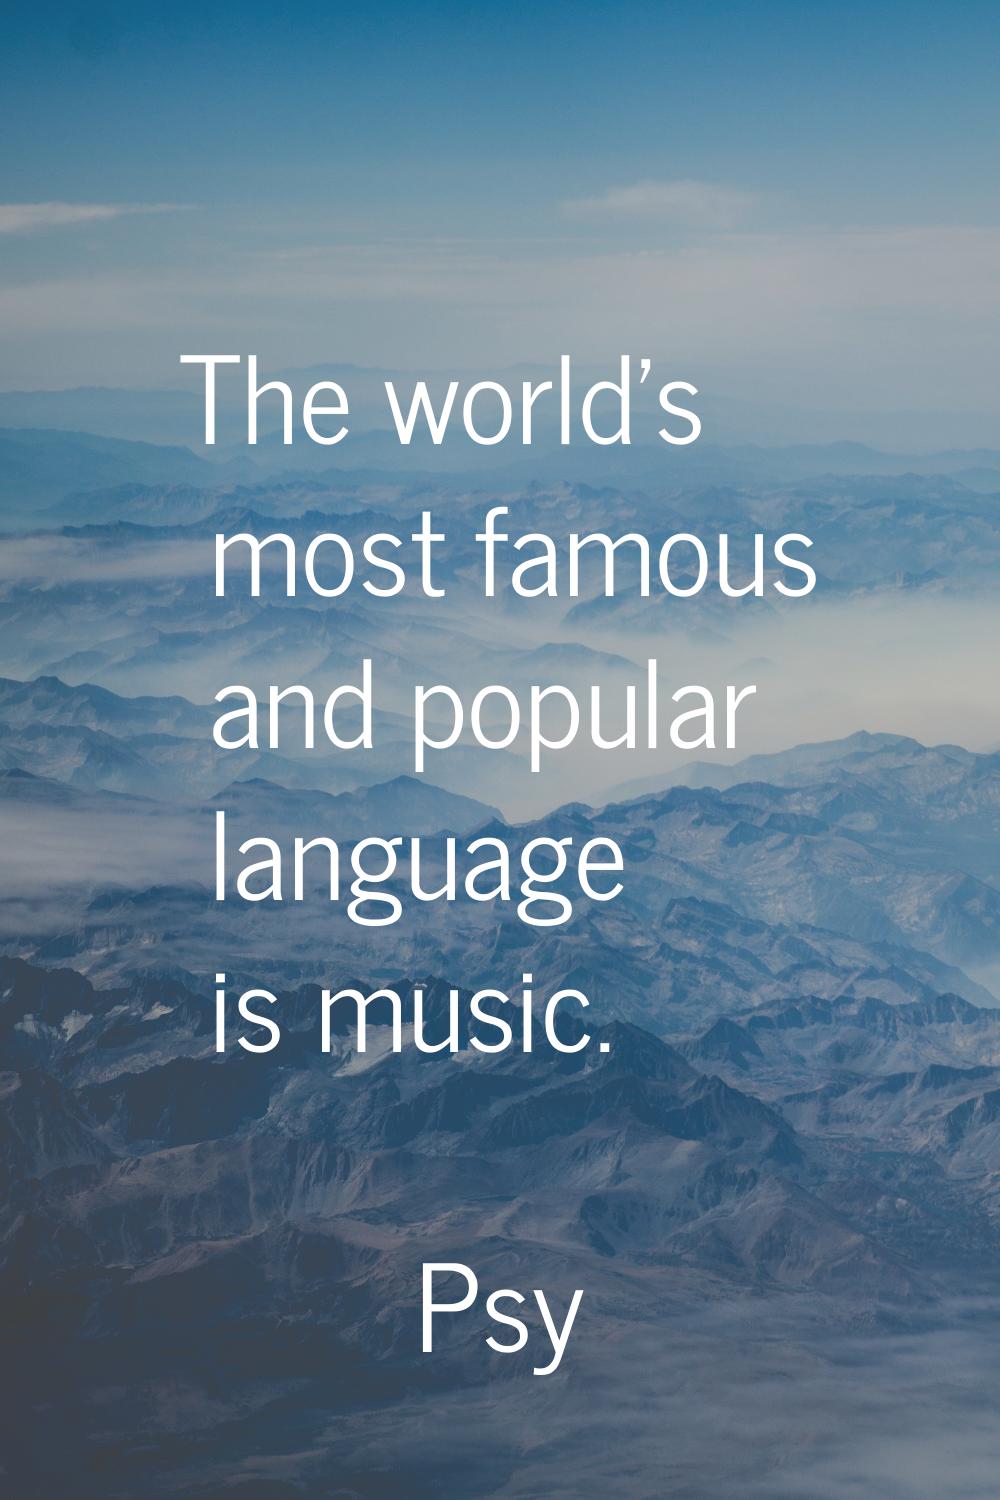 The world's most famous and popular language is music.